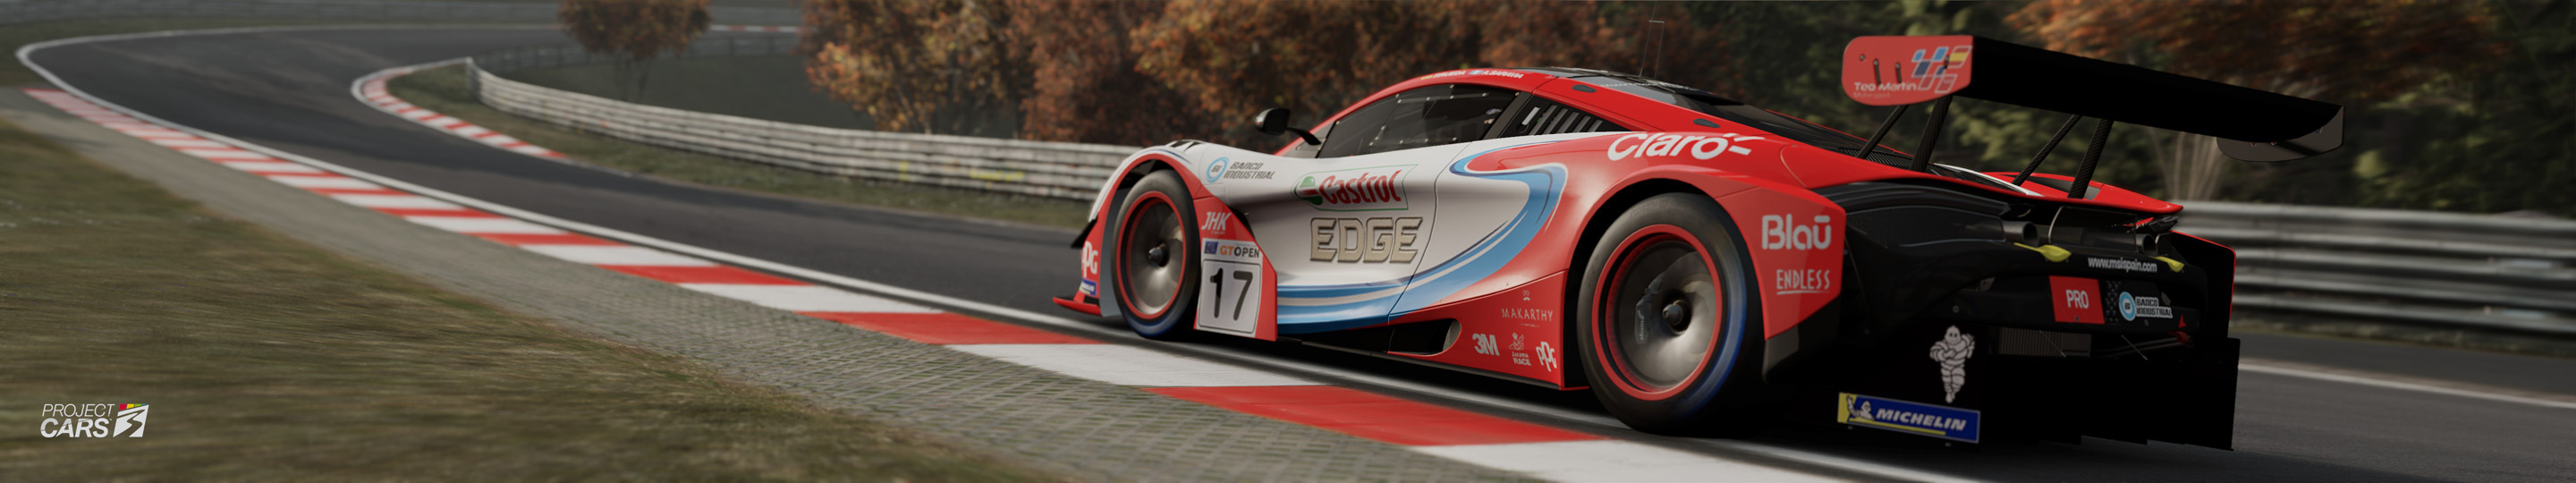 4 PROJECT CARS 3 GT3 at NORDSCHLEIFE copy.jpg